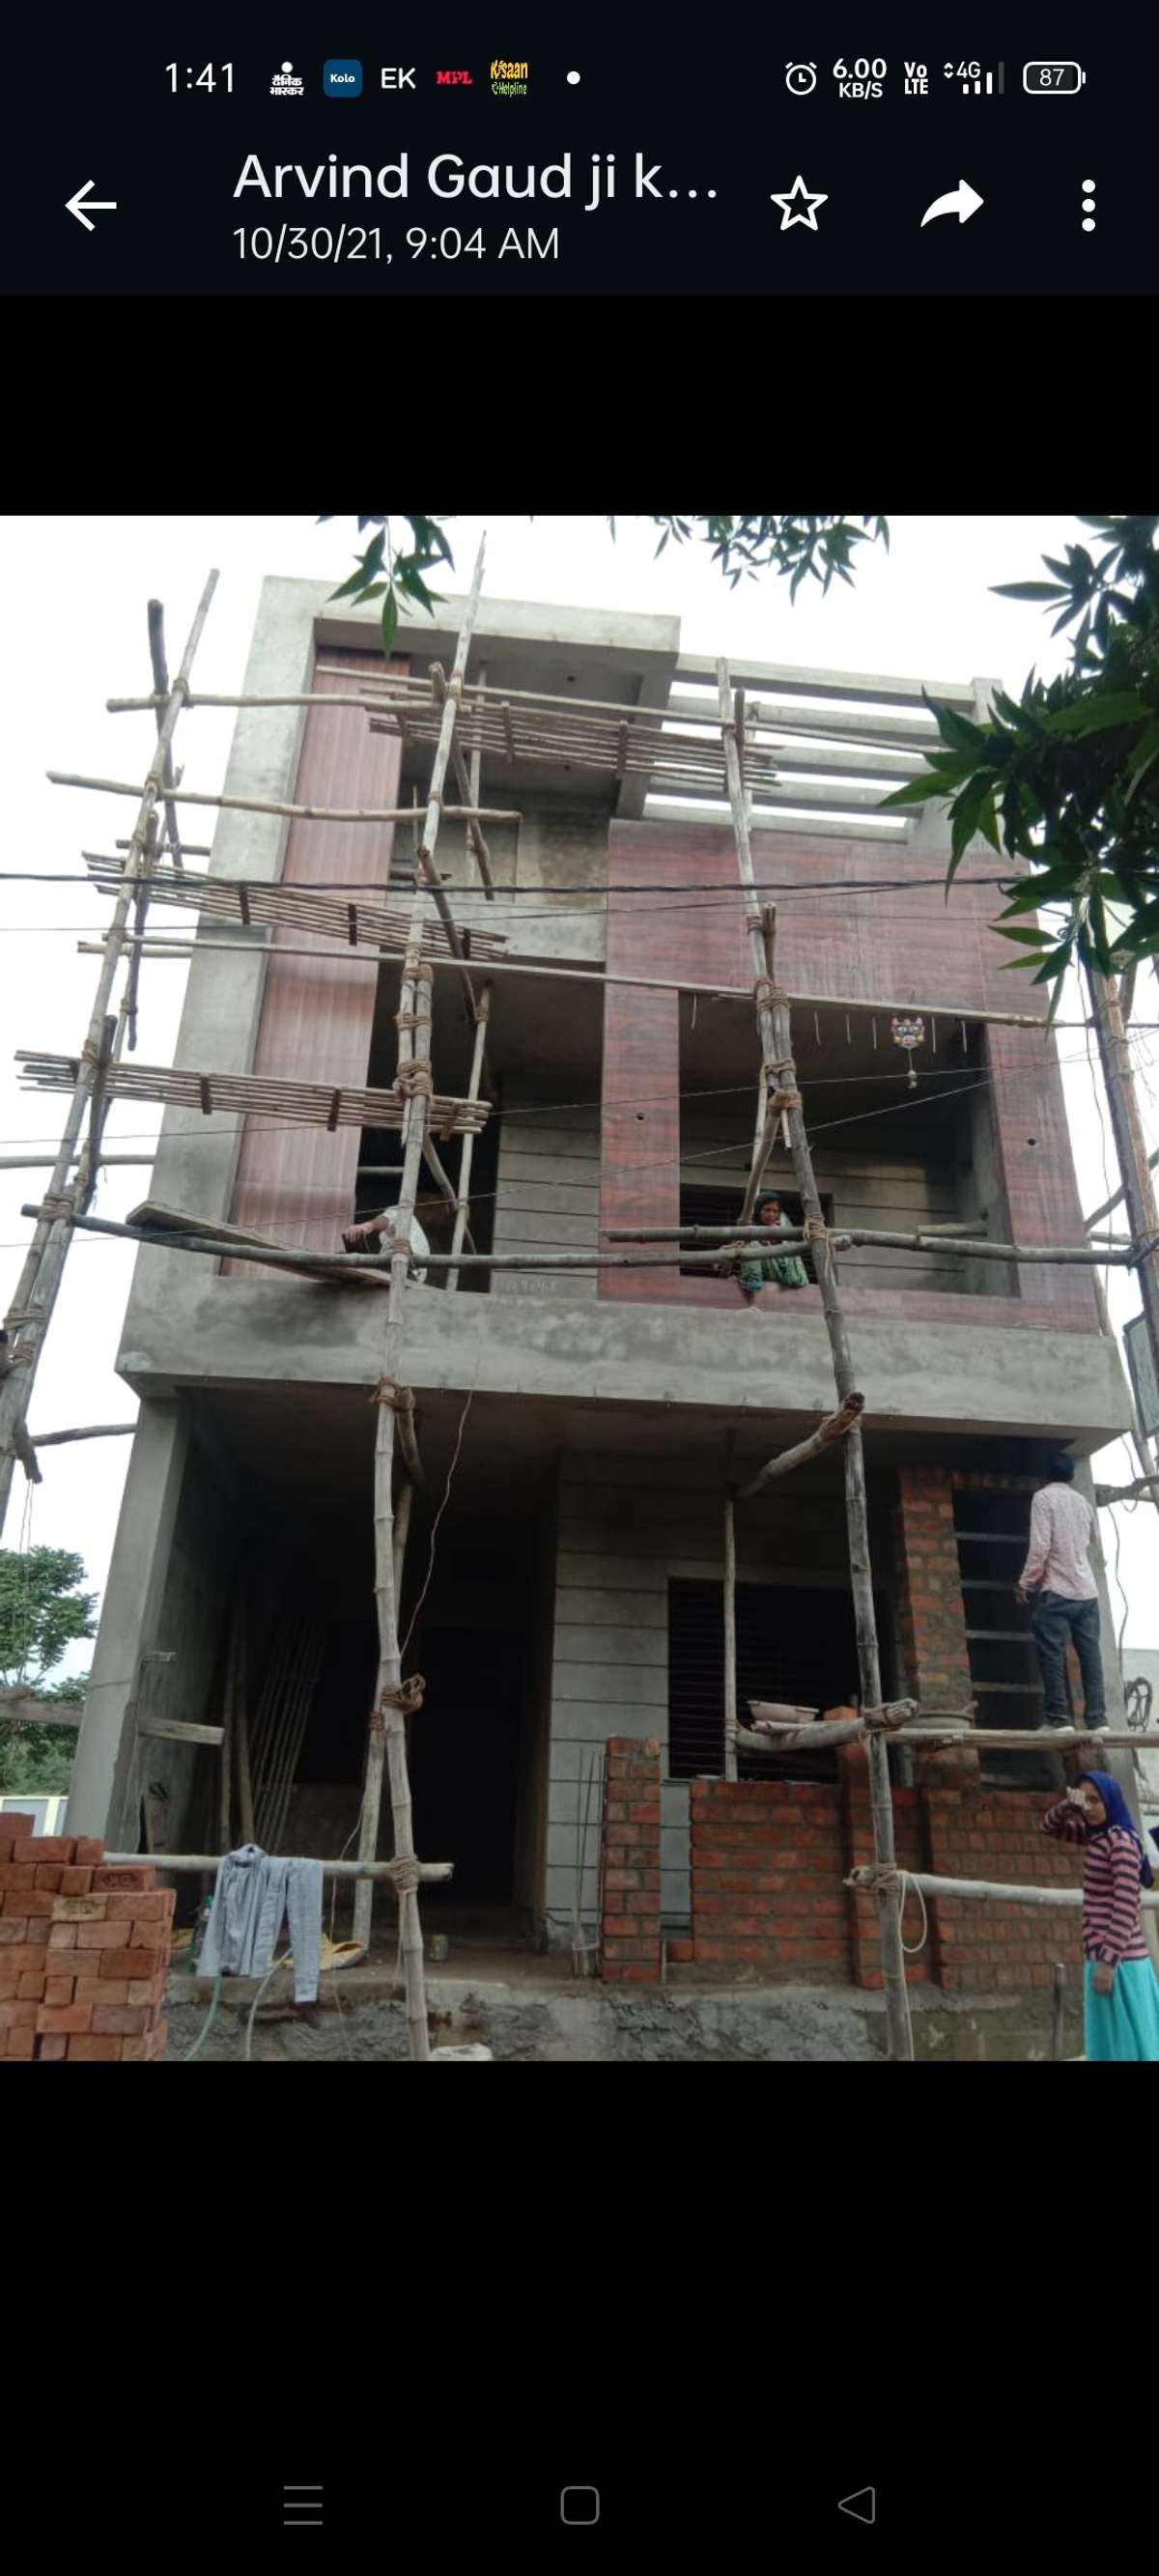 #ElevationDesign
#20x50houseelevation
#krishnanagar#mhow

Contact for construction of your dream home.
In your service since last 22 year's. 

Er. RAHUL CHOUHAN